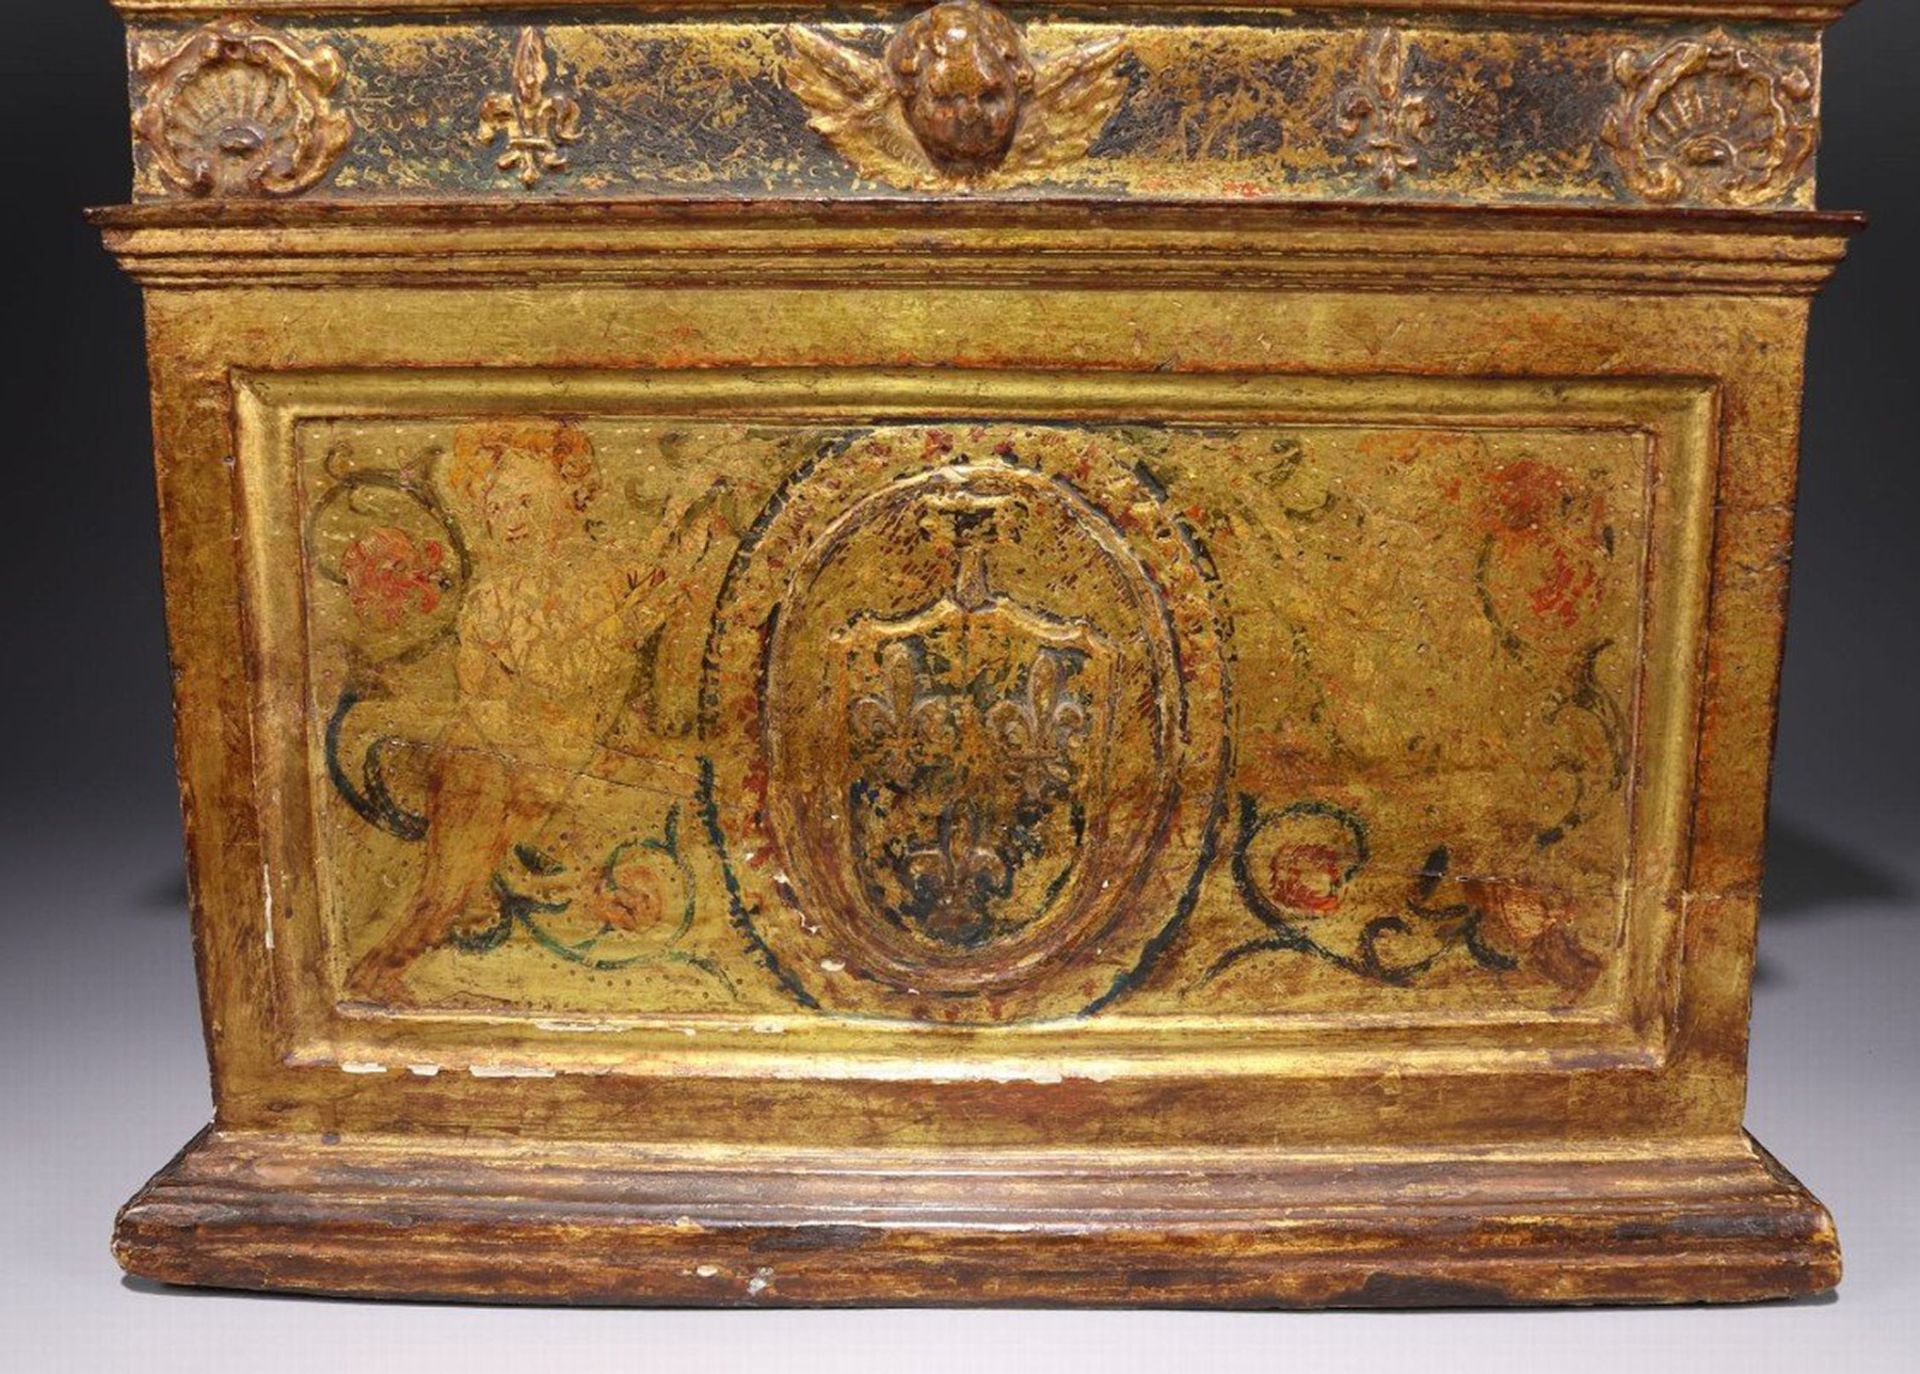 Rare Italian Medical Chest of the Renaissance, Milan or Vizcaya, made by the house of Medinaceli, he - Image 3 of 10